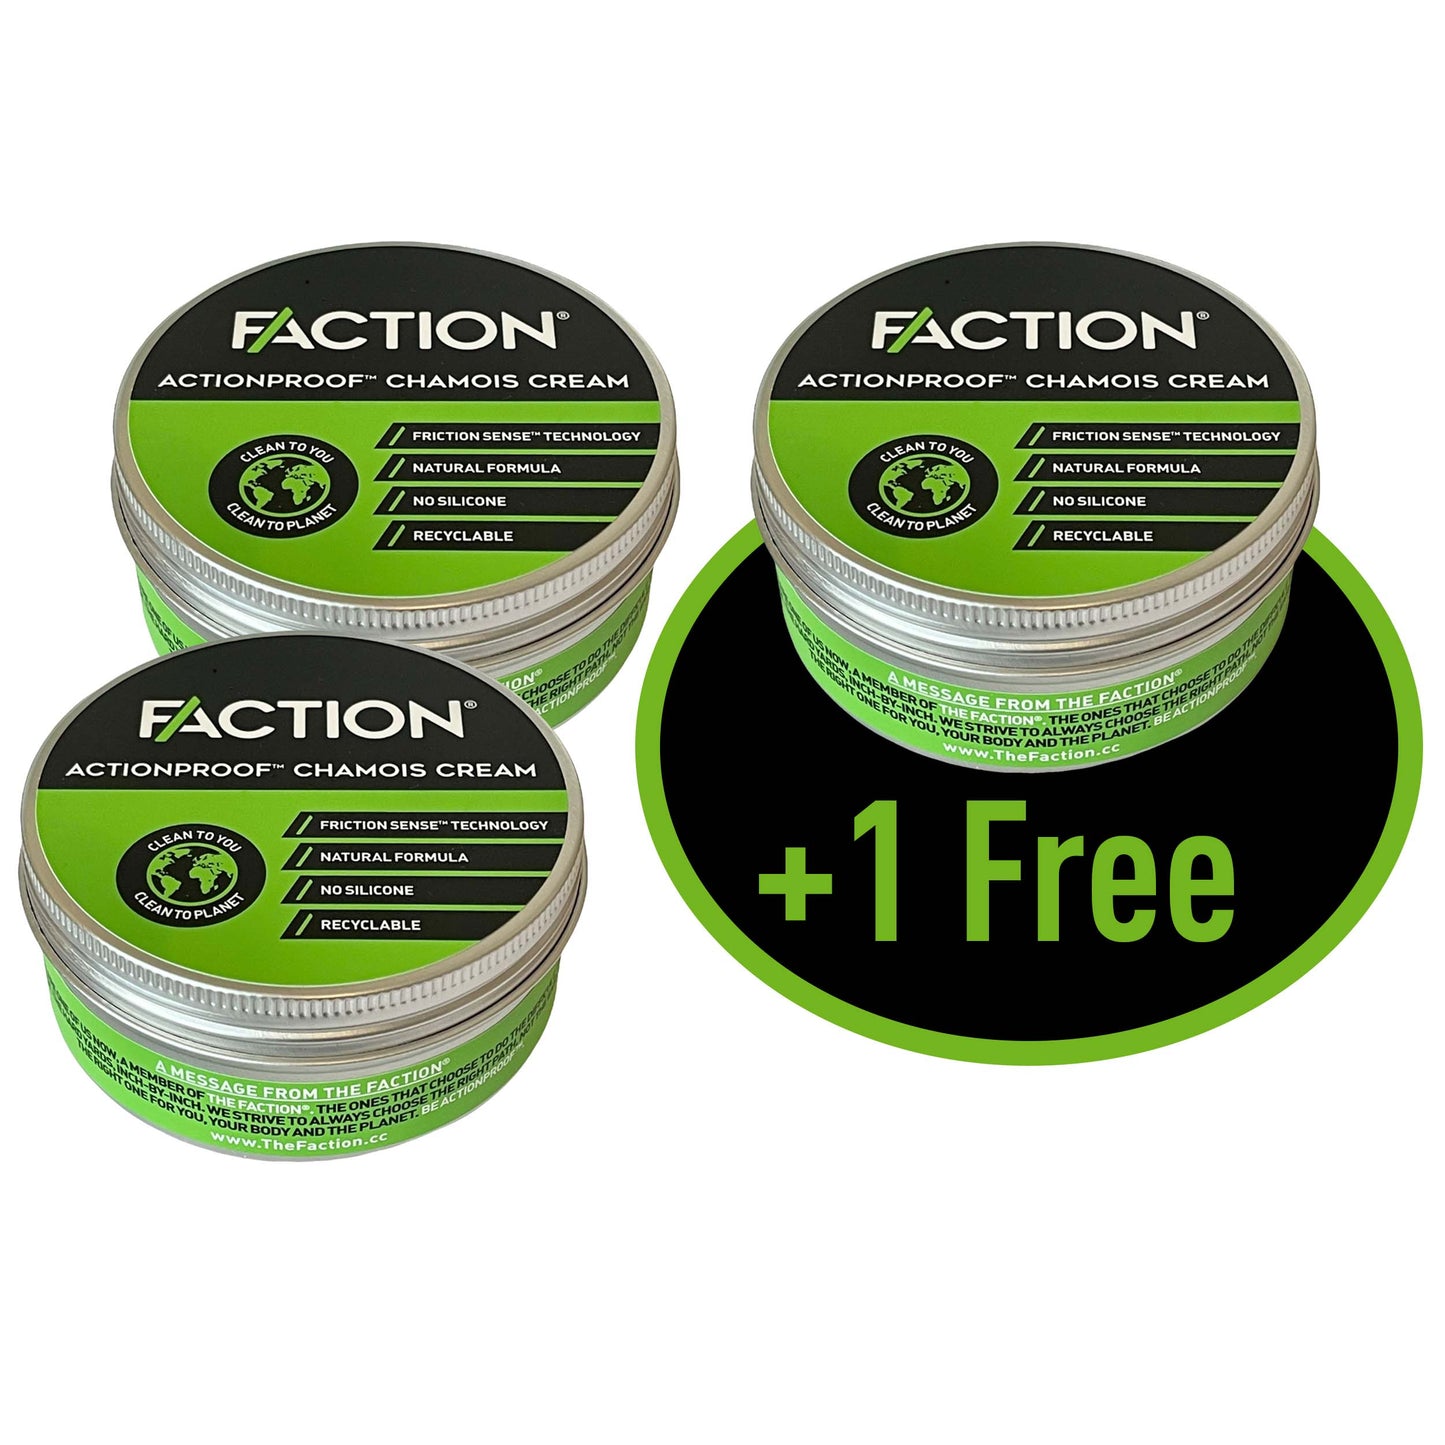 Faction Actionproof Chamois Cream - Attack Pack - Buy 2 Get 1 Free